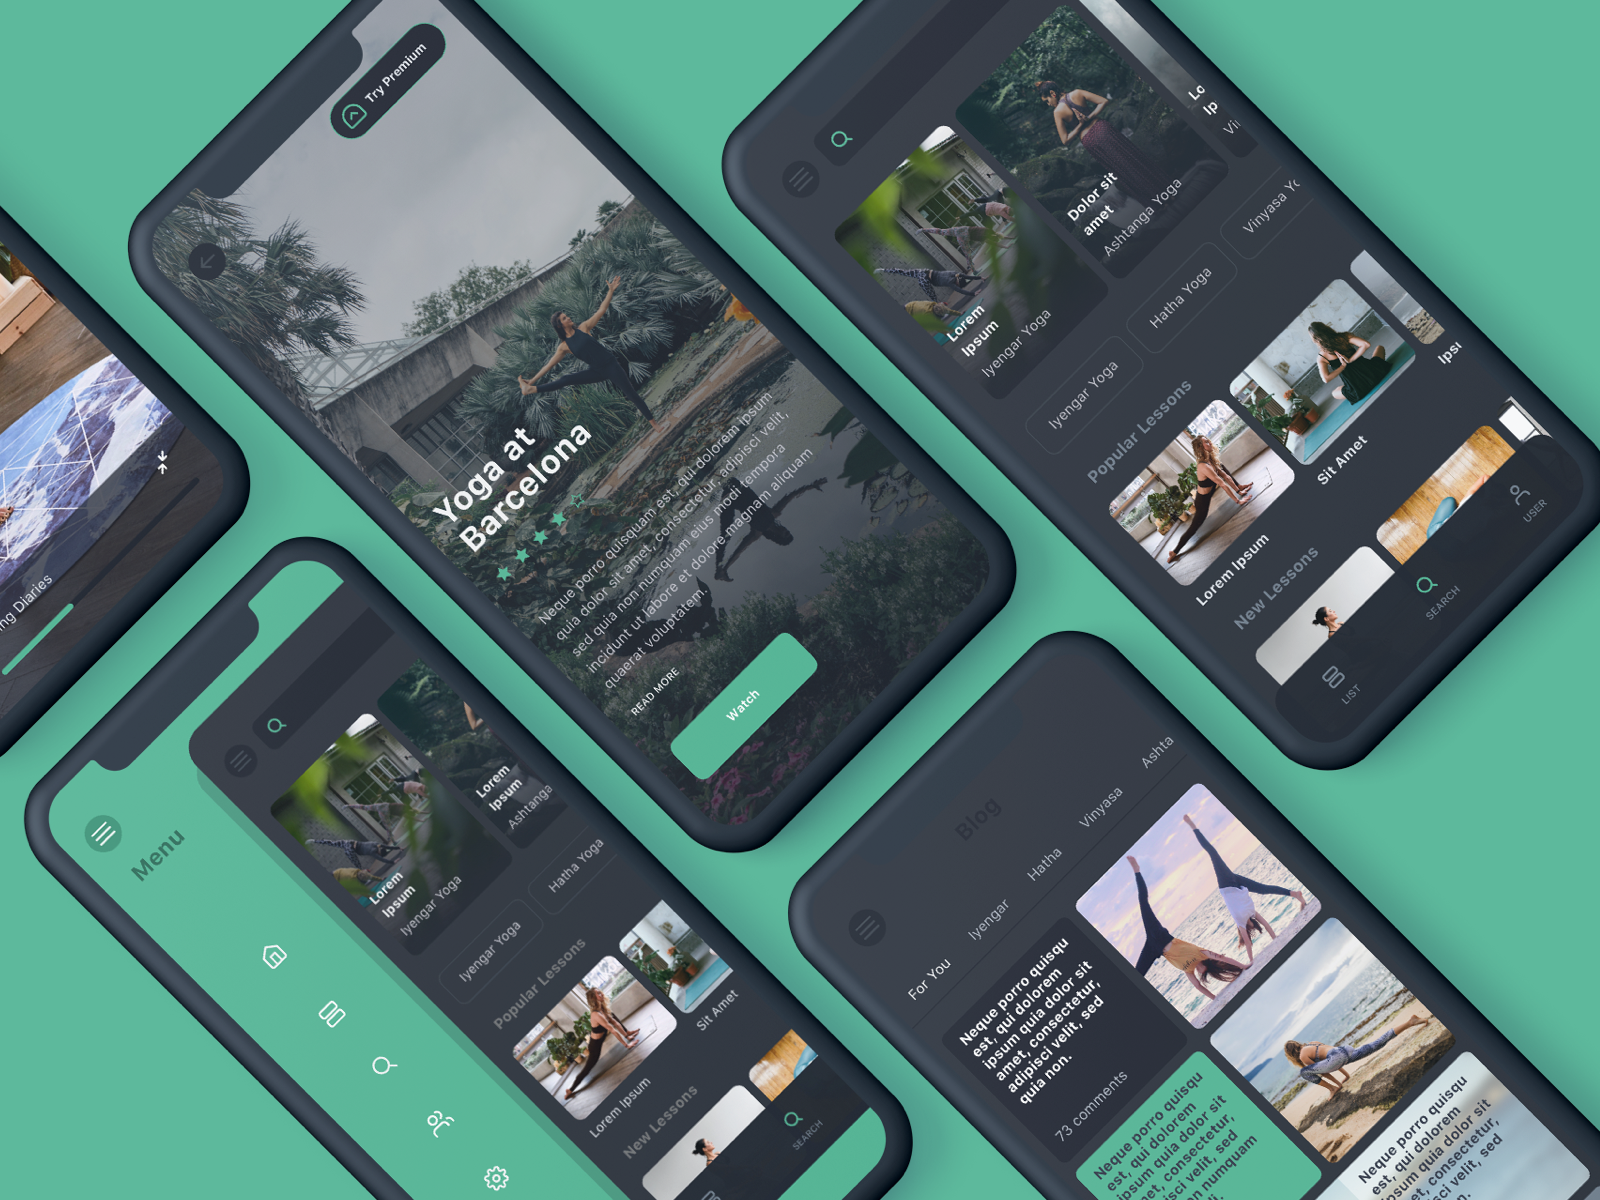 Classi - Educational Video App UI Kit by uicube on Dribbble